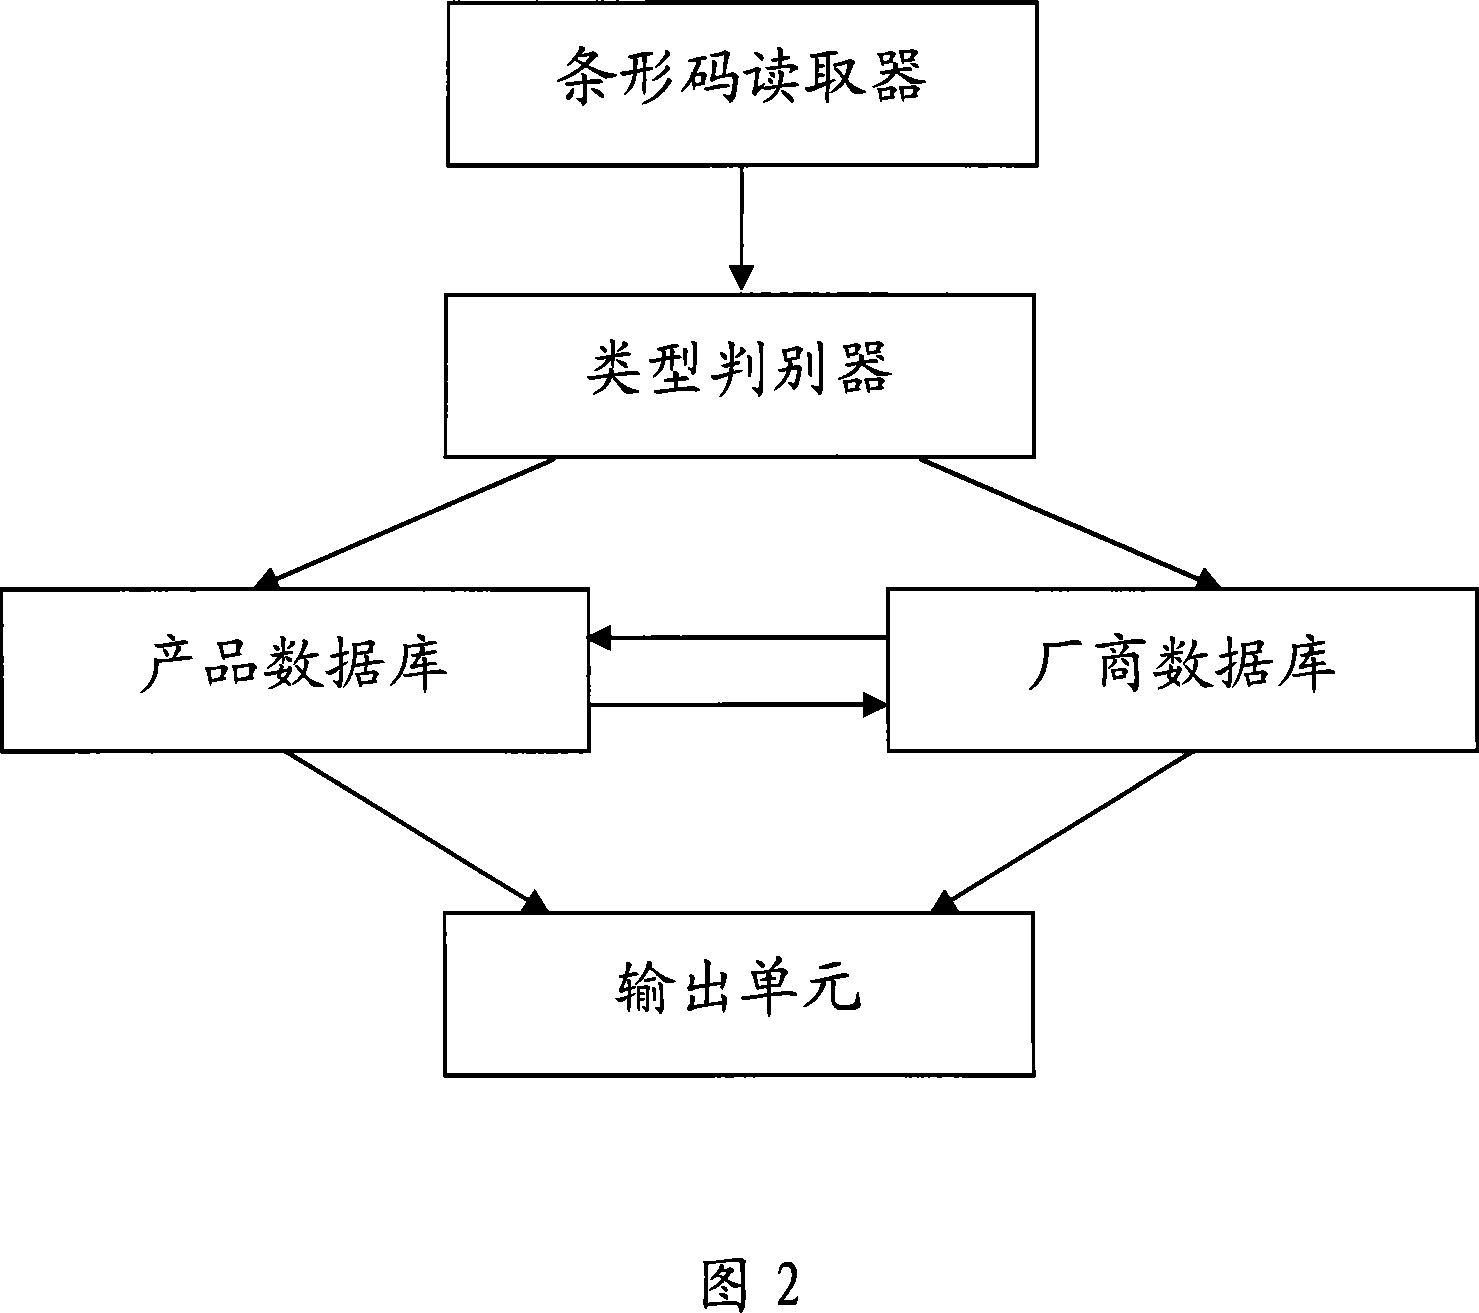 Method and system for identifying agricultural product by code bar